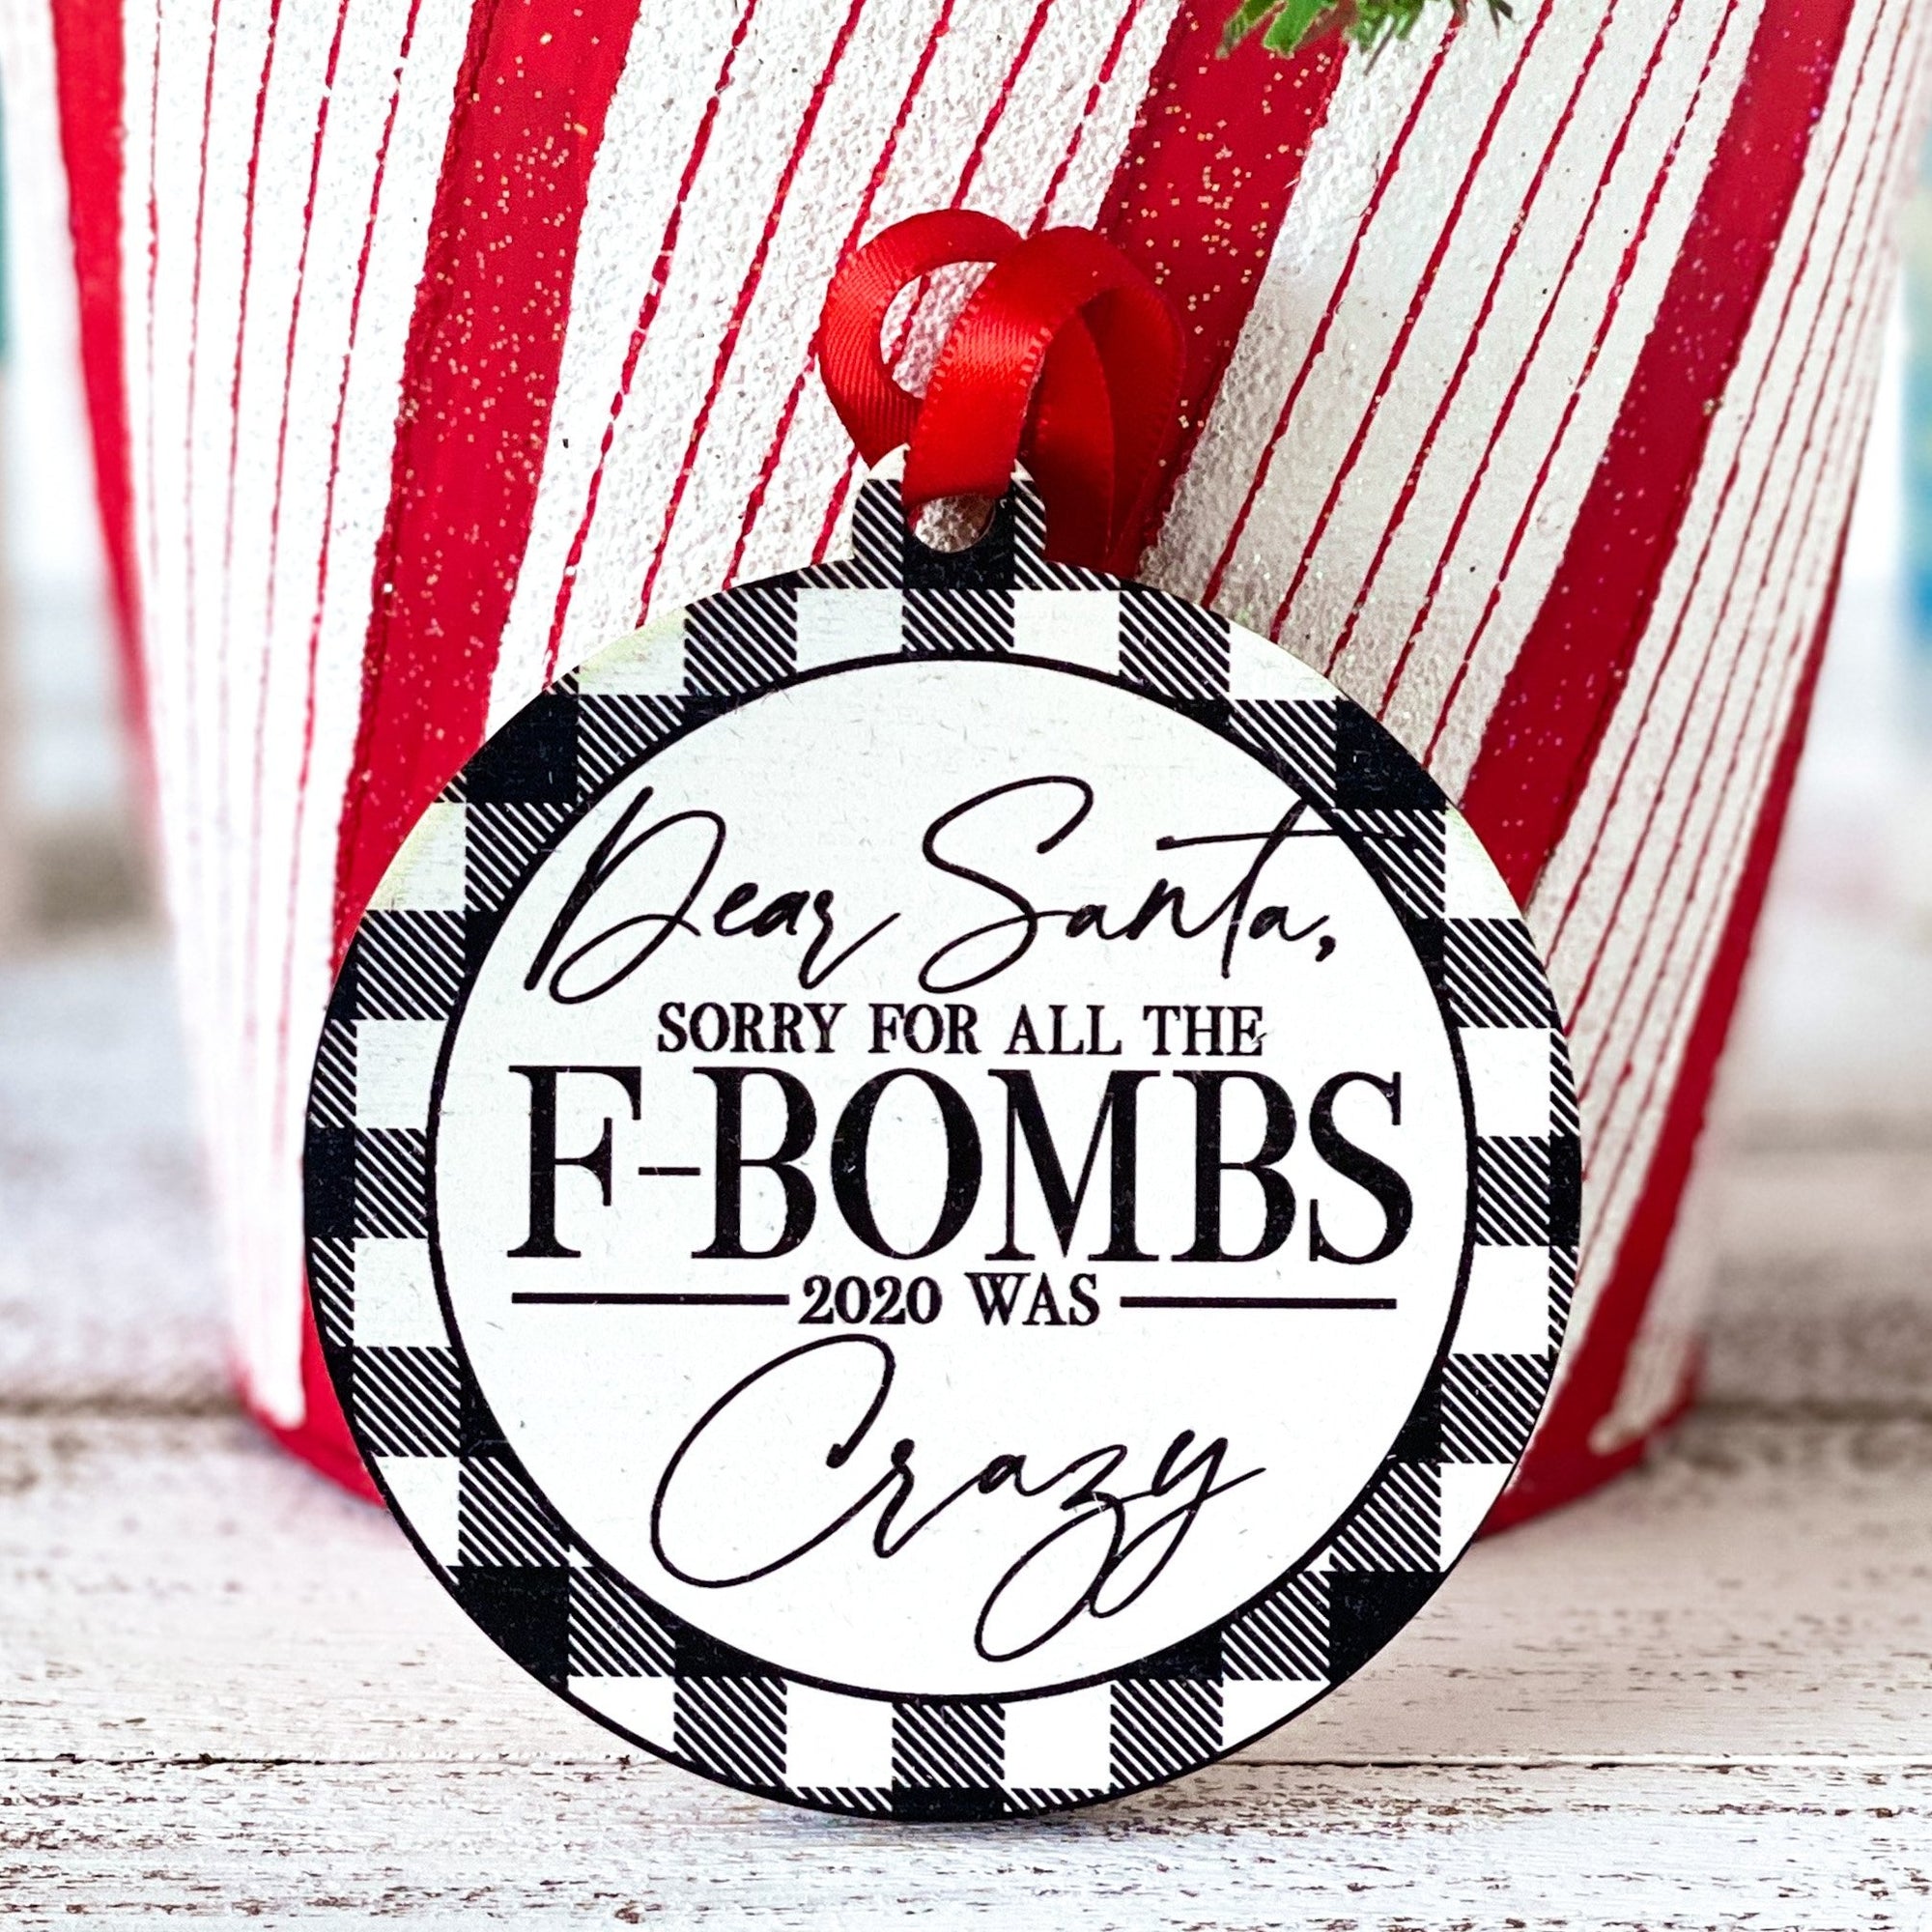 Black & White Buffalo Plaid, Dear Santa, Sorry For The F-Bombs 2020 Was Crazy Wooden Ornament